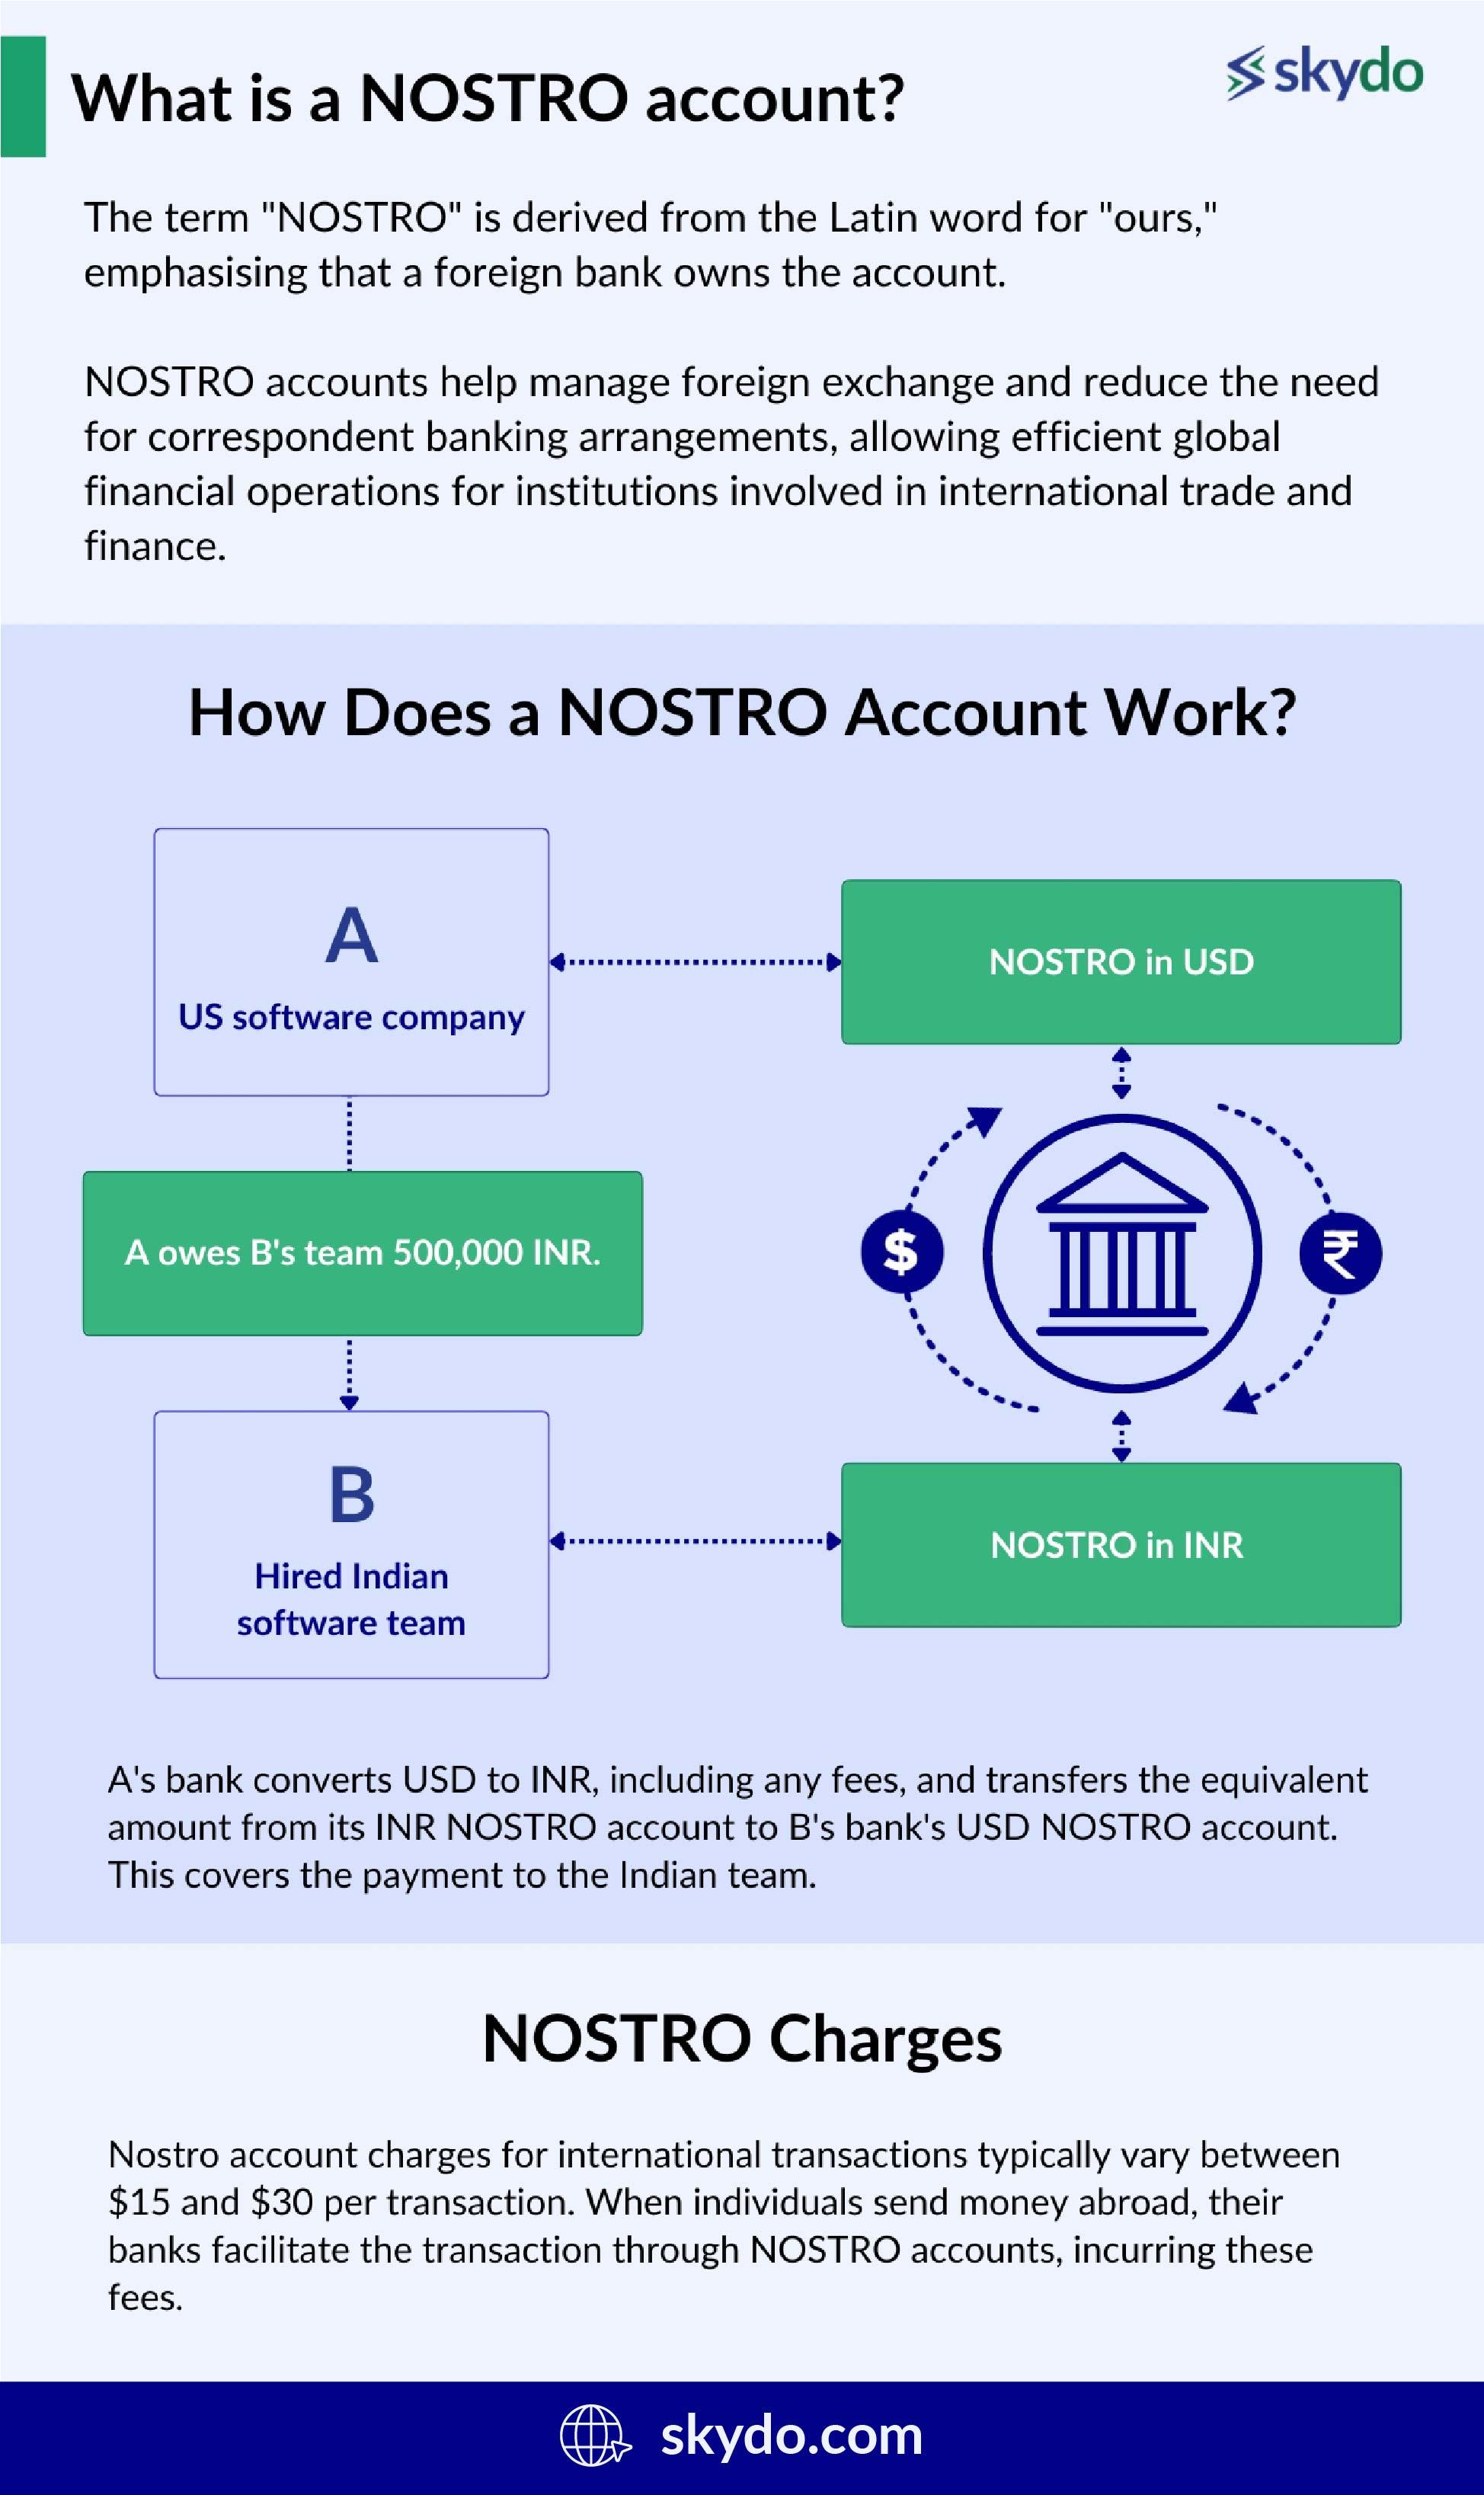 What is a NOSTRO account?